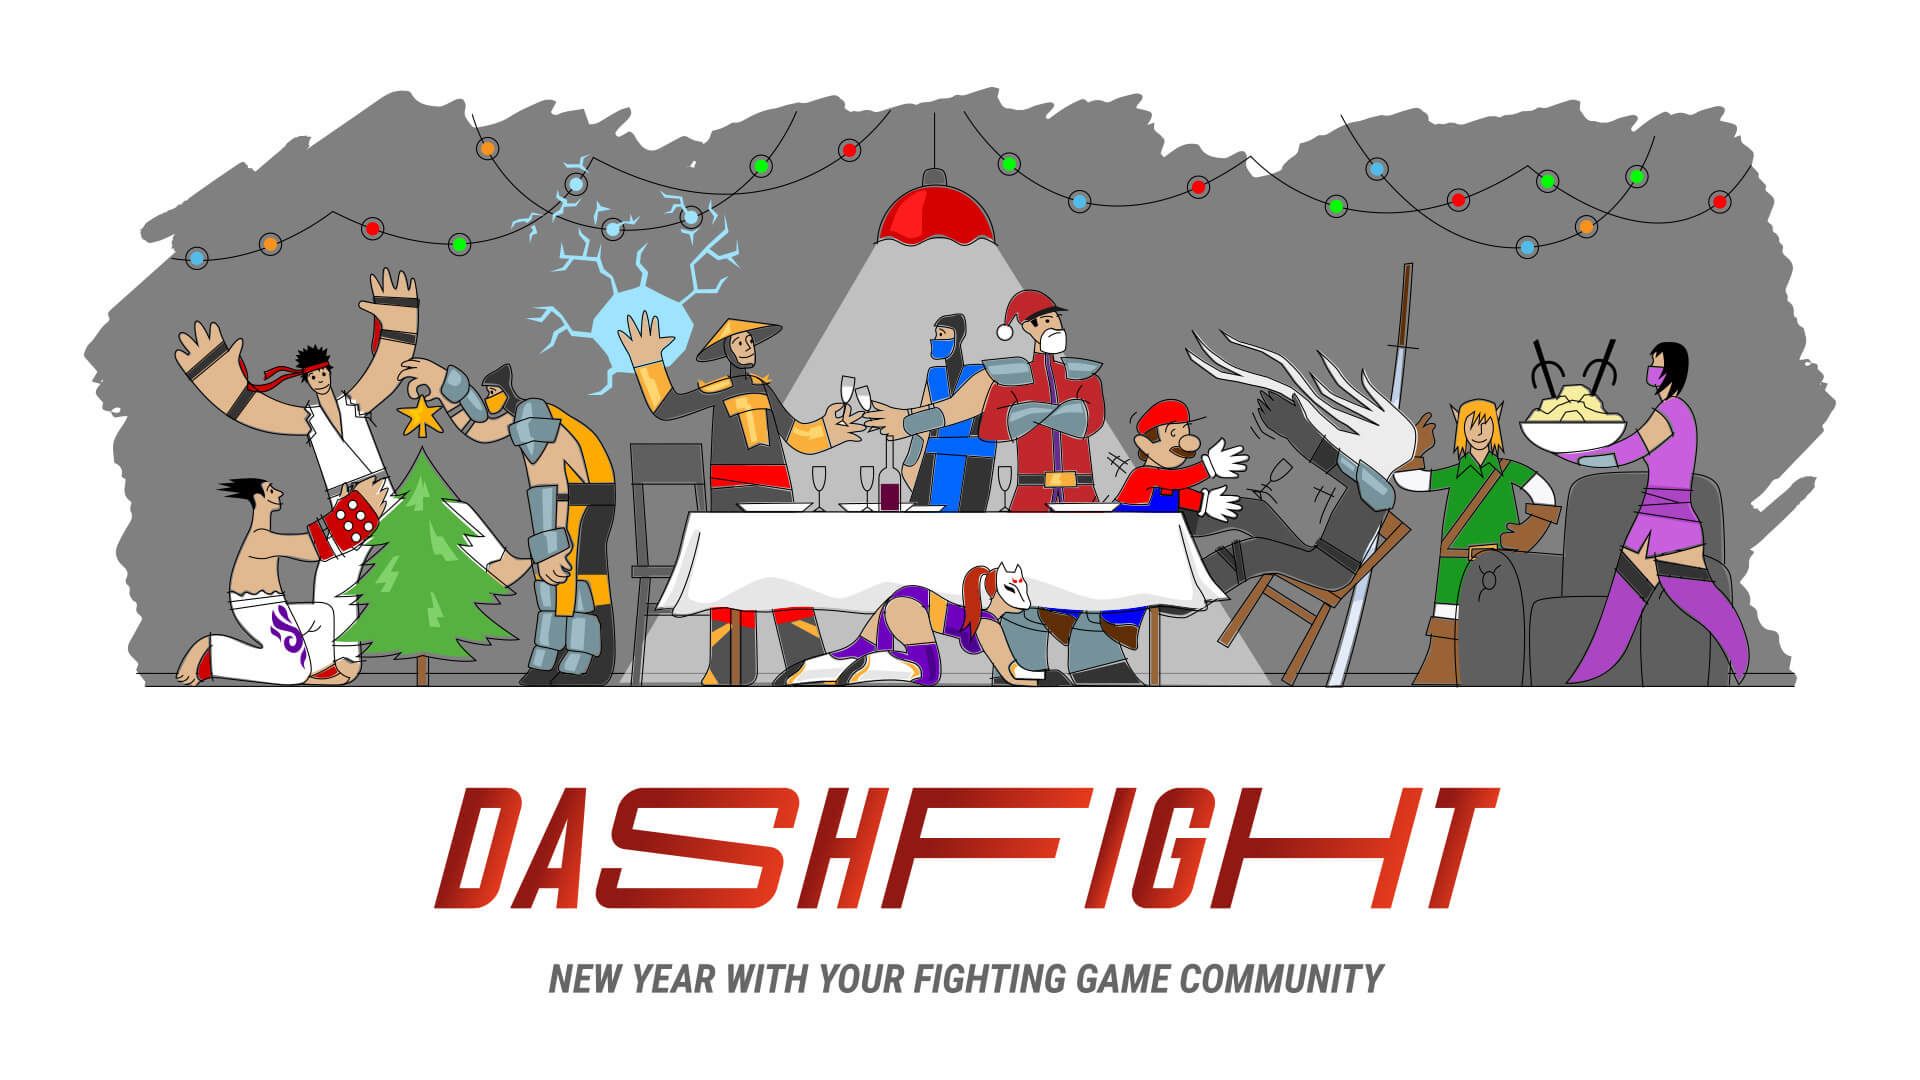 A season's greetings from all of us at DashFight!